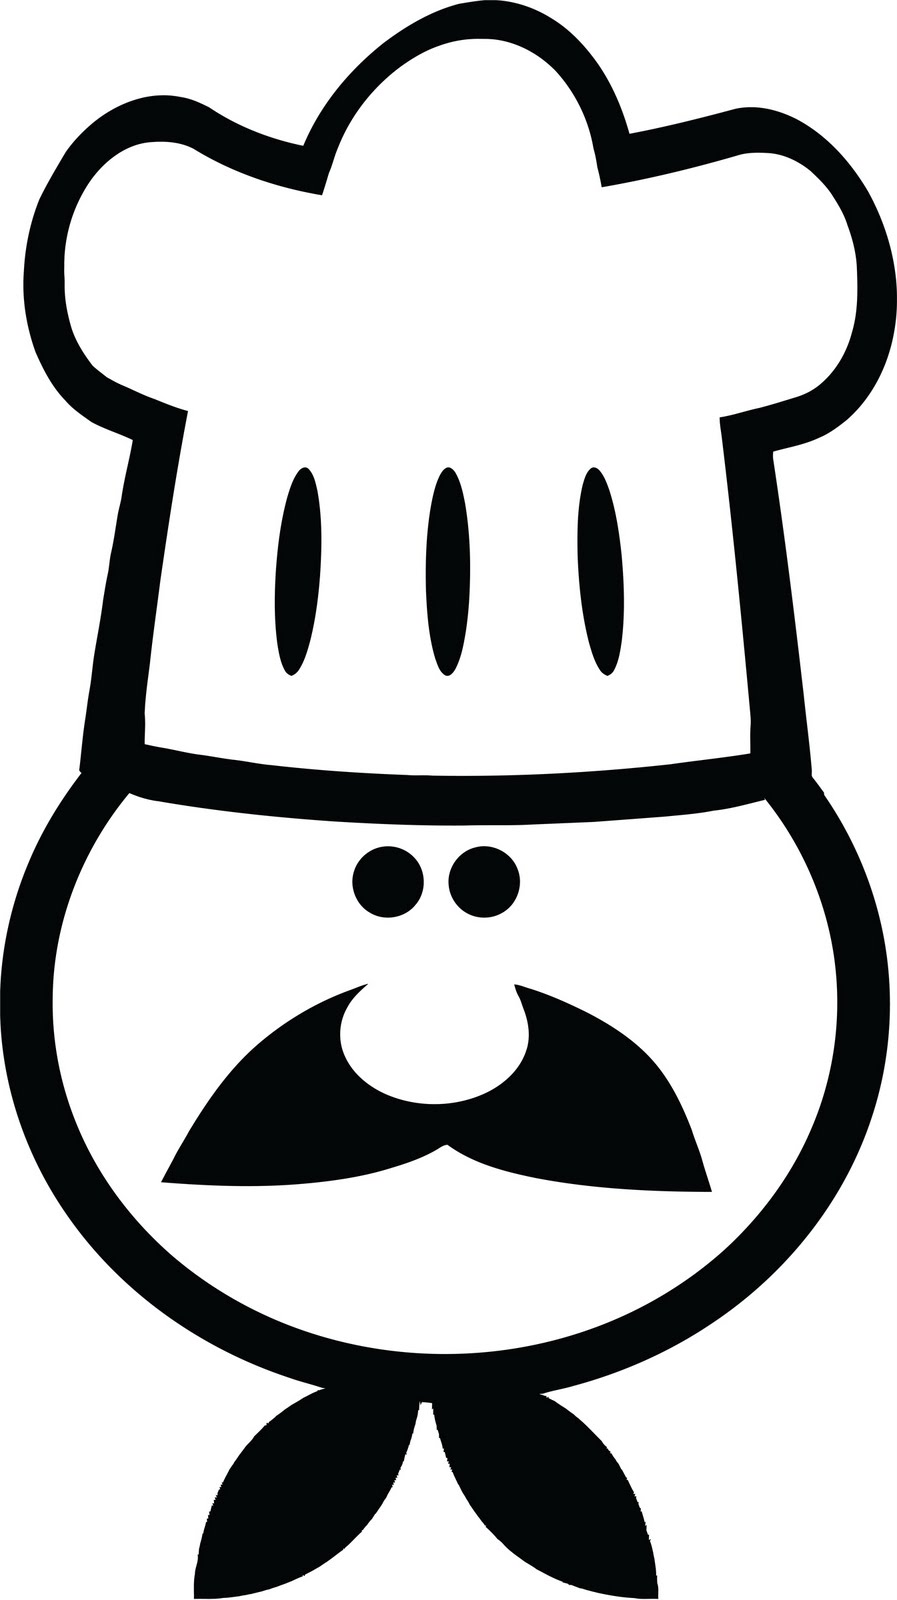 free chef hat clipart - photo #42